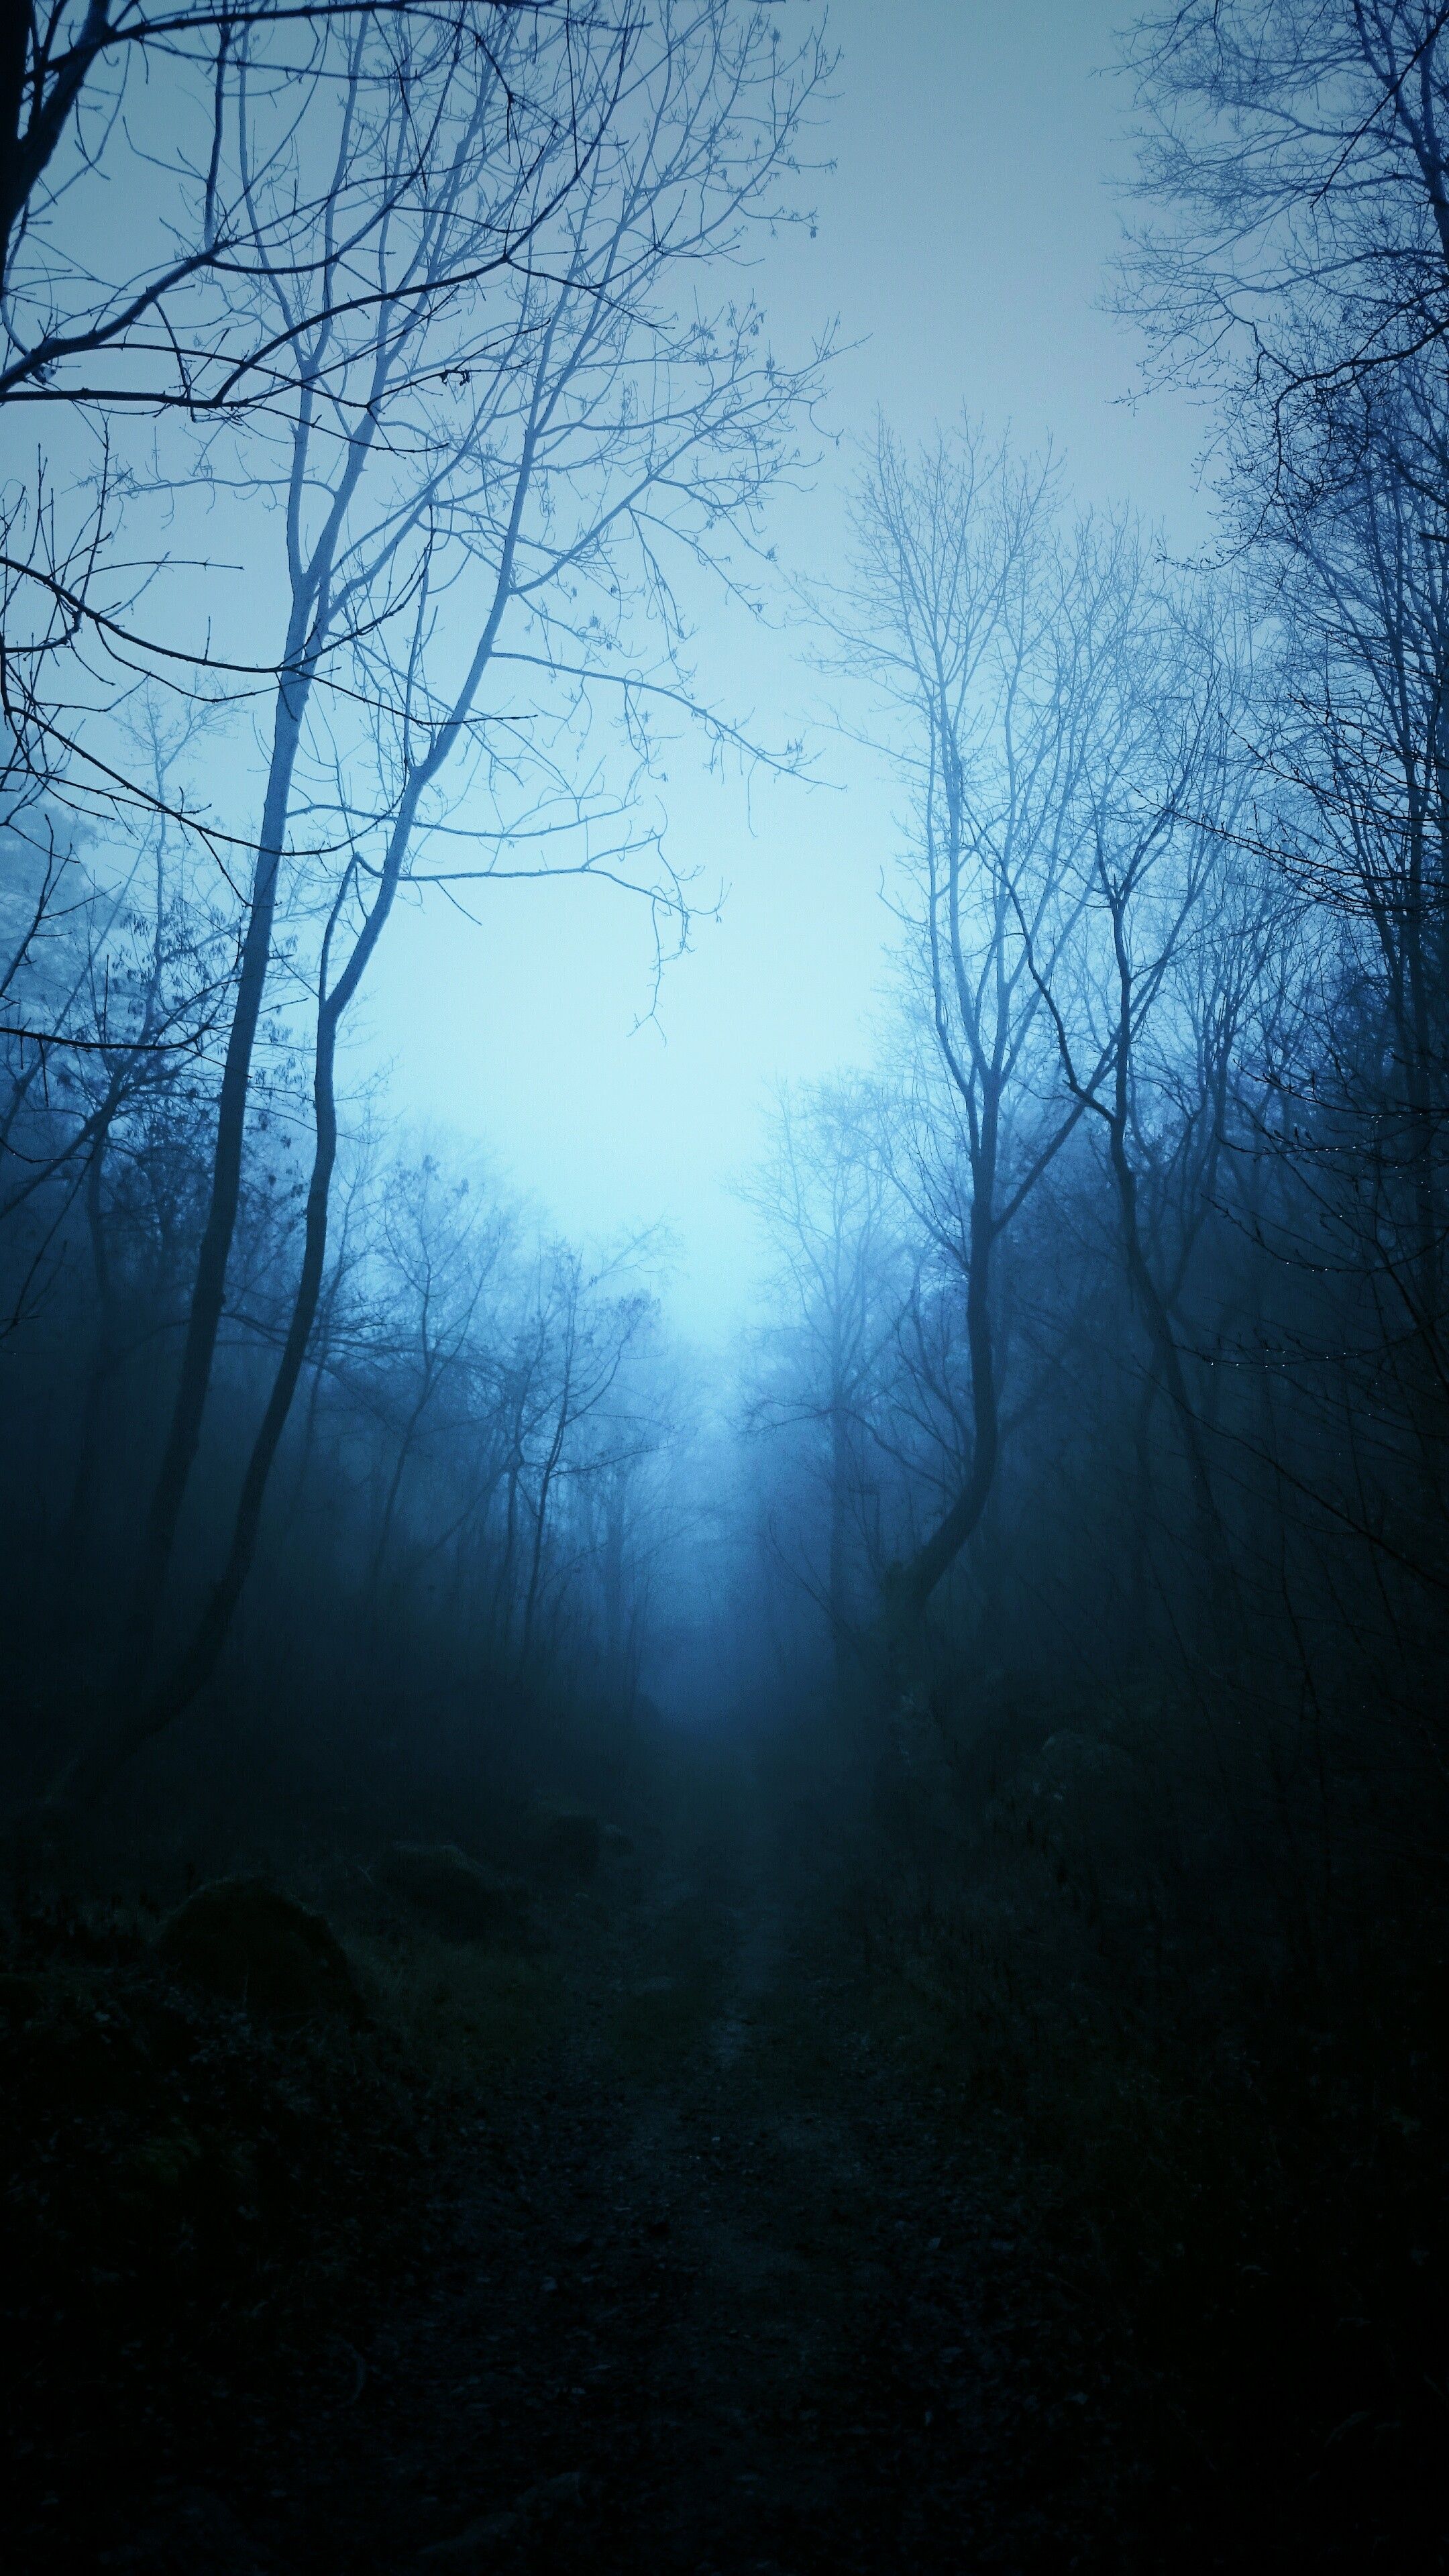 #mist, #trees, #nature, #tropical forest, #dark, #blue